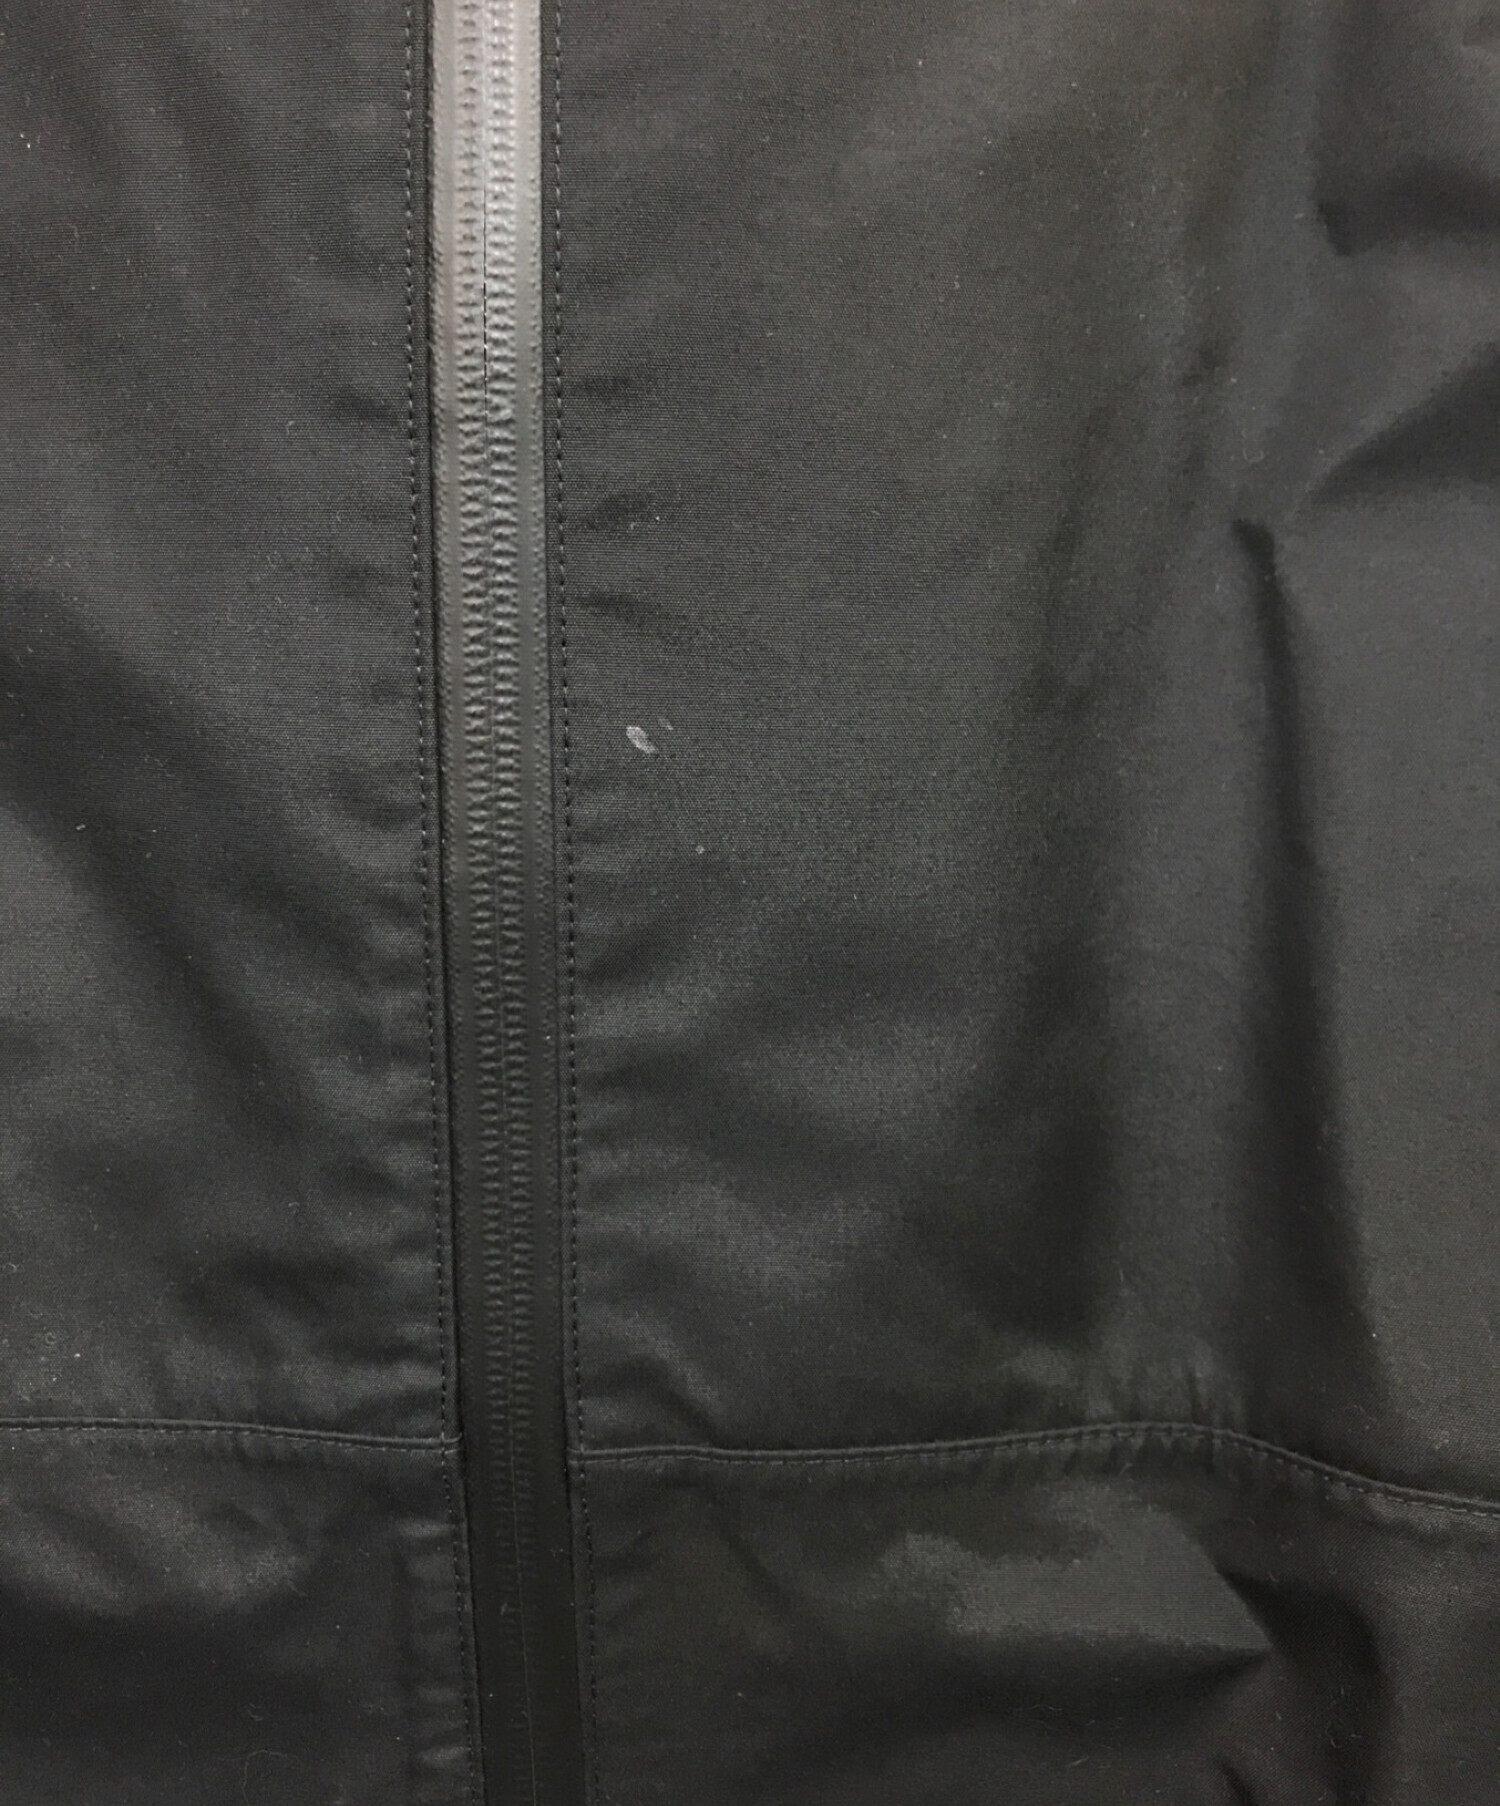 UNDEFEATED (アンディフィーテッド) UNDEFEATED MOUNTAIN PARKA/マウンテンパーカー ブラック サイズ:XL